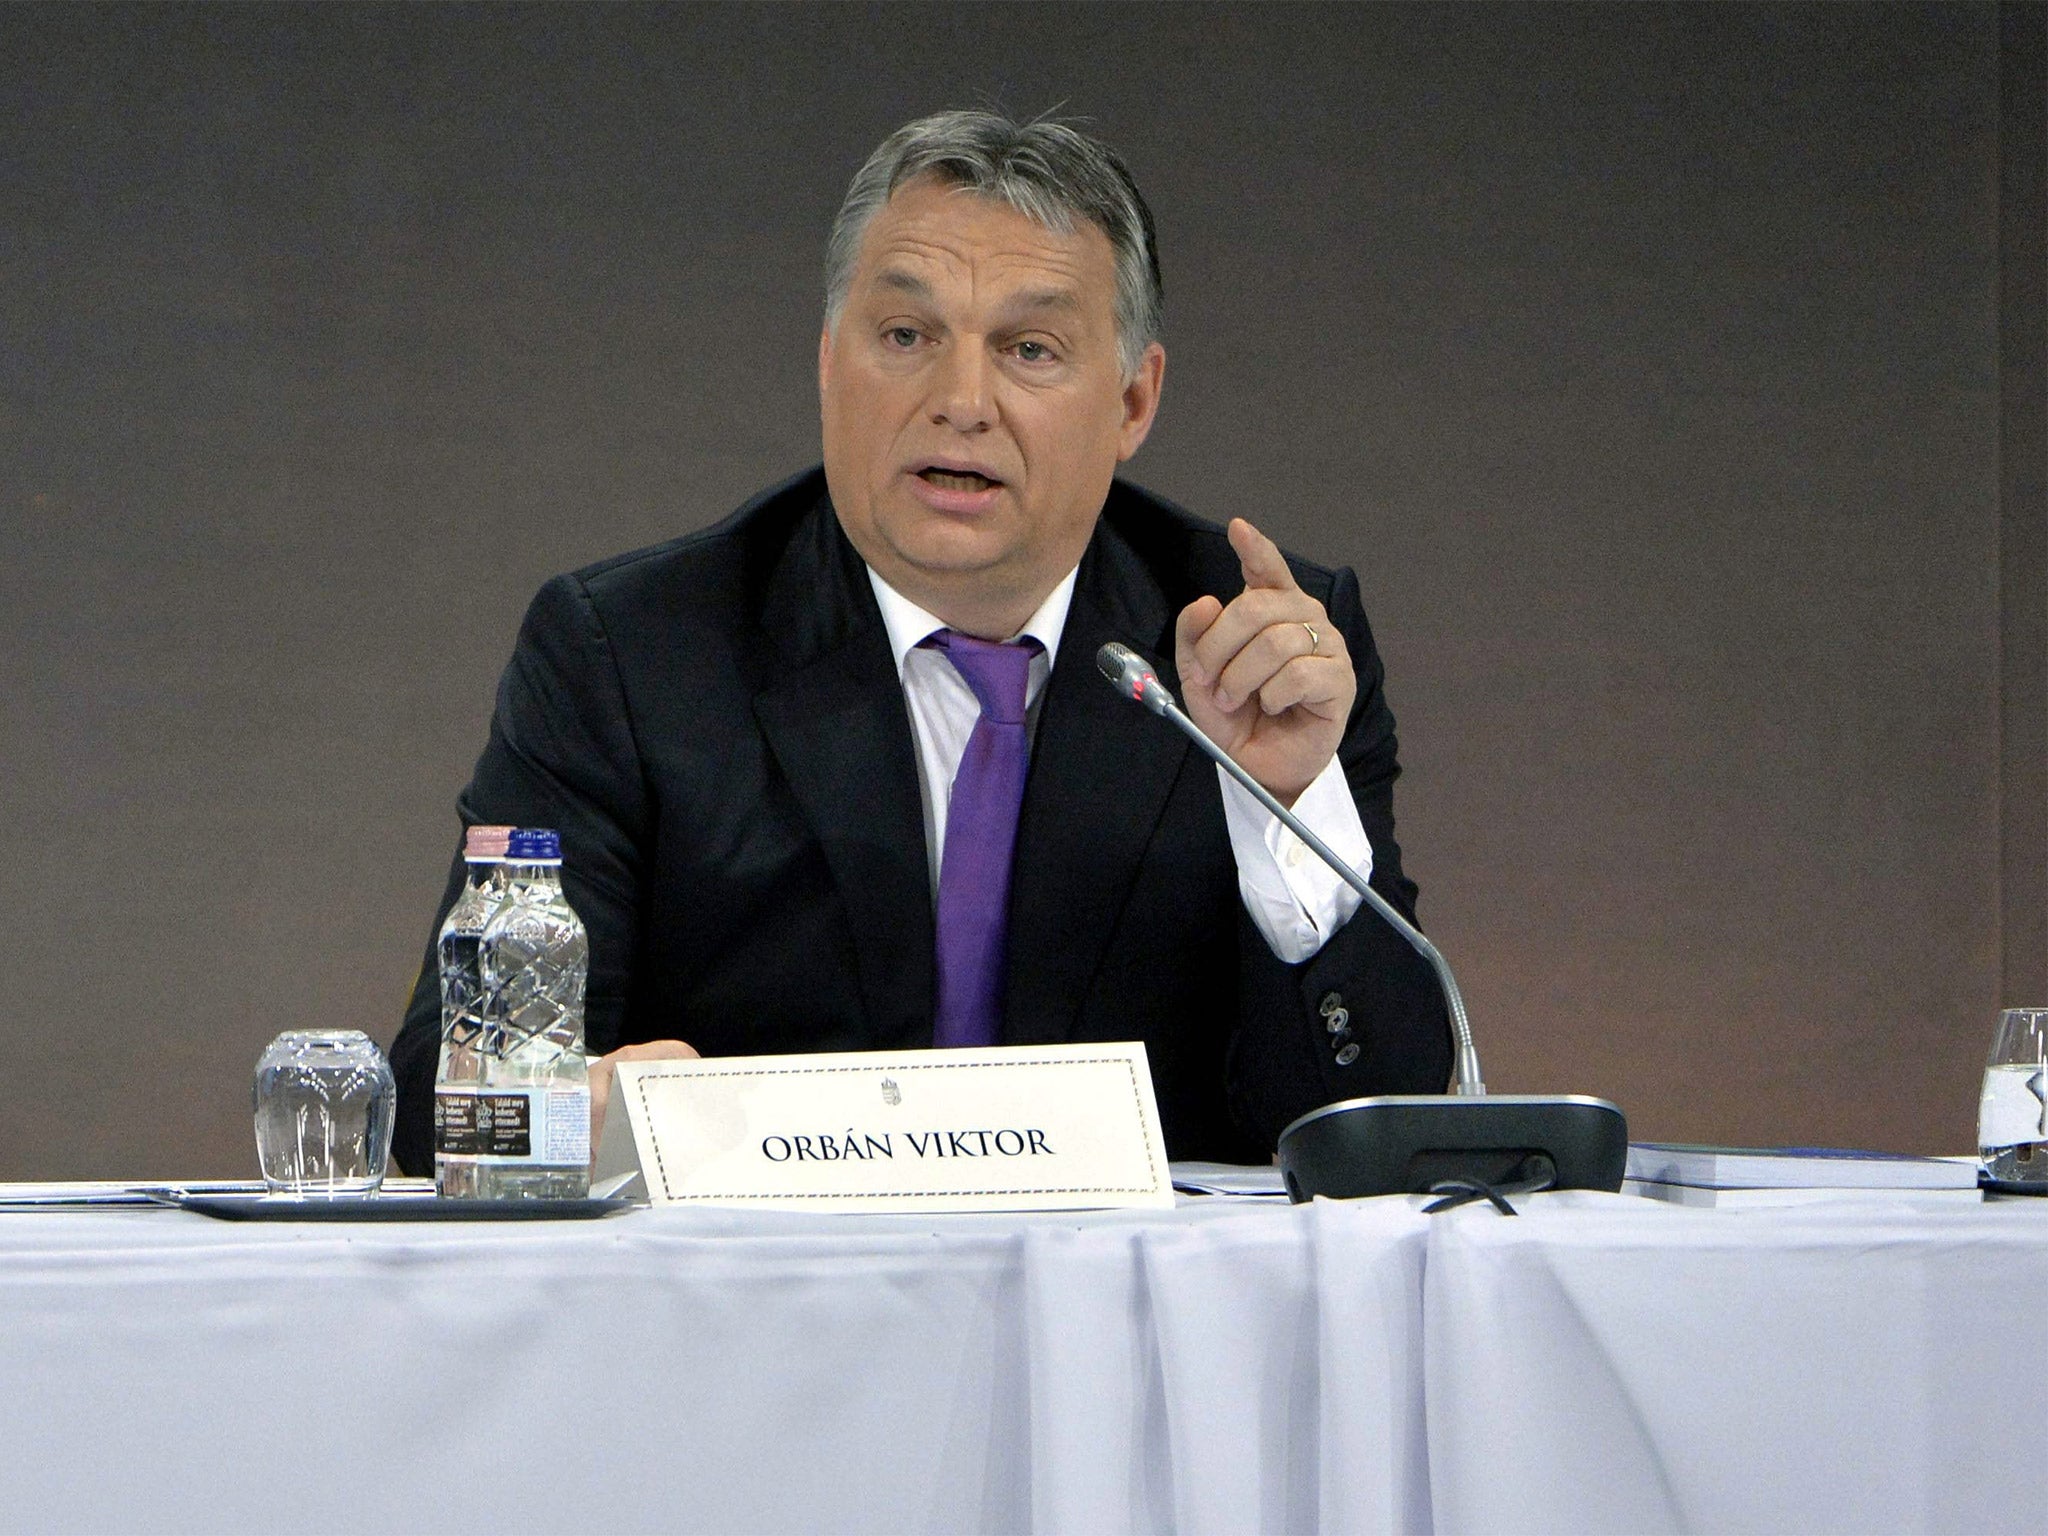 &#13;
Hungarian PM Viktor Orban says the EU has agreed to take in 500,000 Syrian refugees from Turkey &#13;